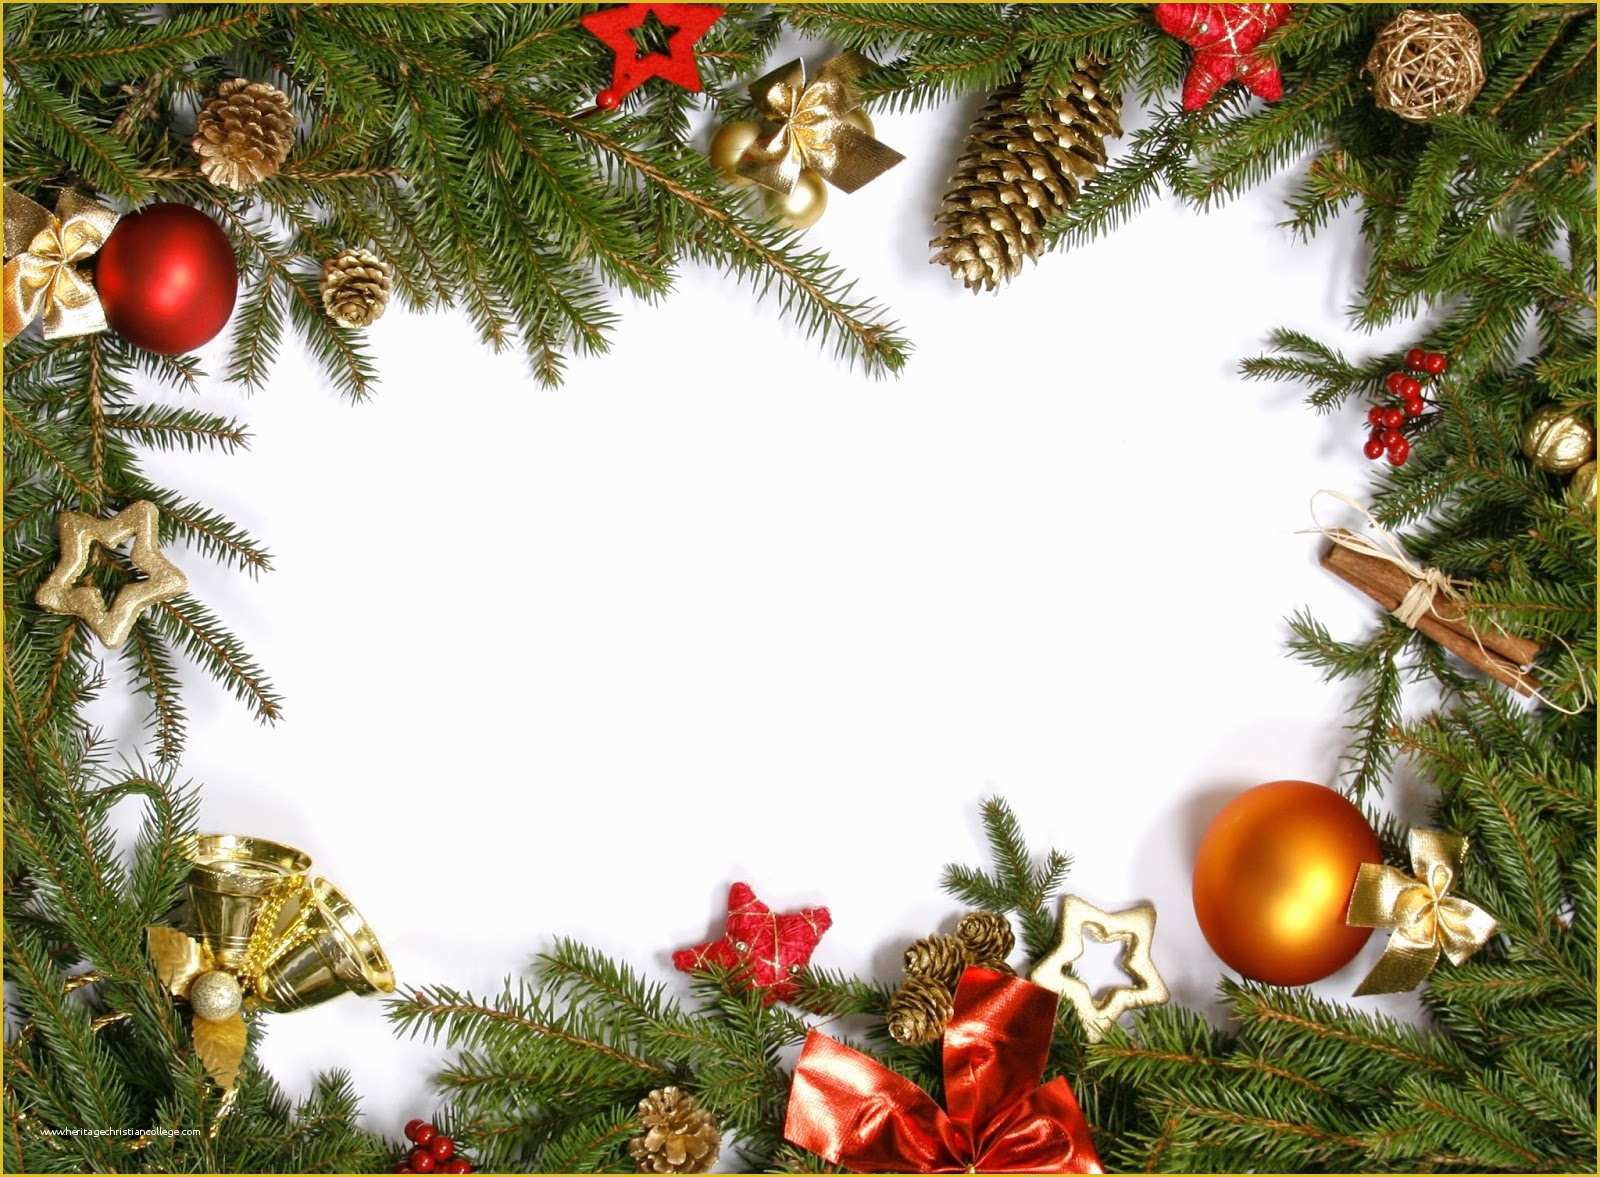 free-christmas-card-templates-for-photoshop-of-1000-ideas-about